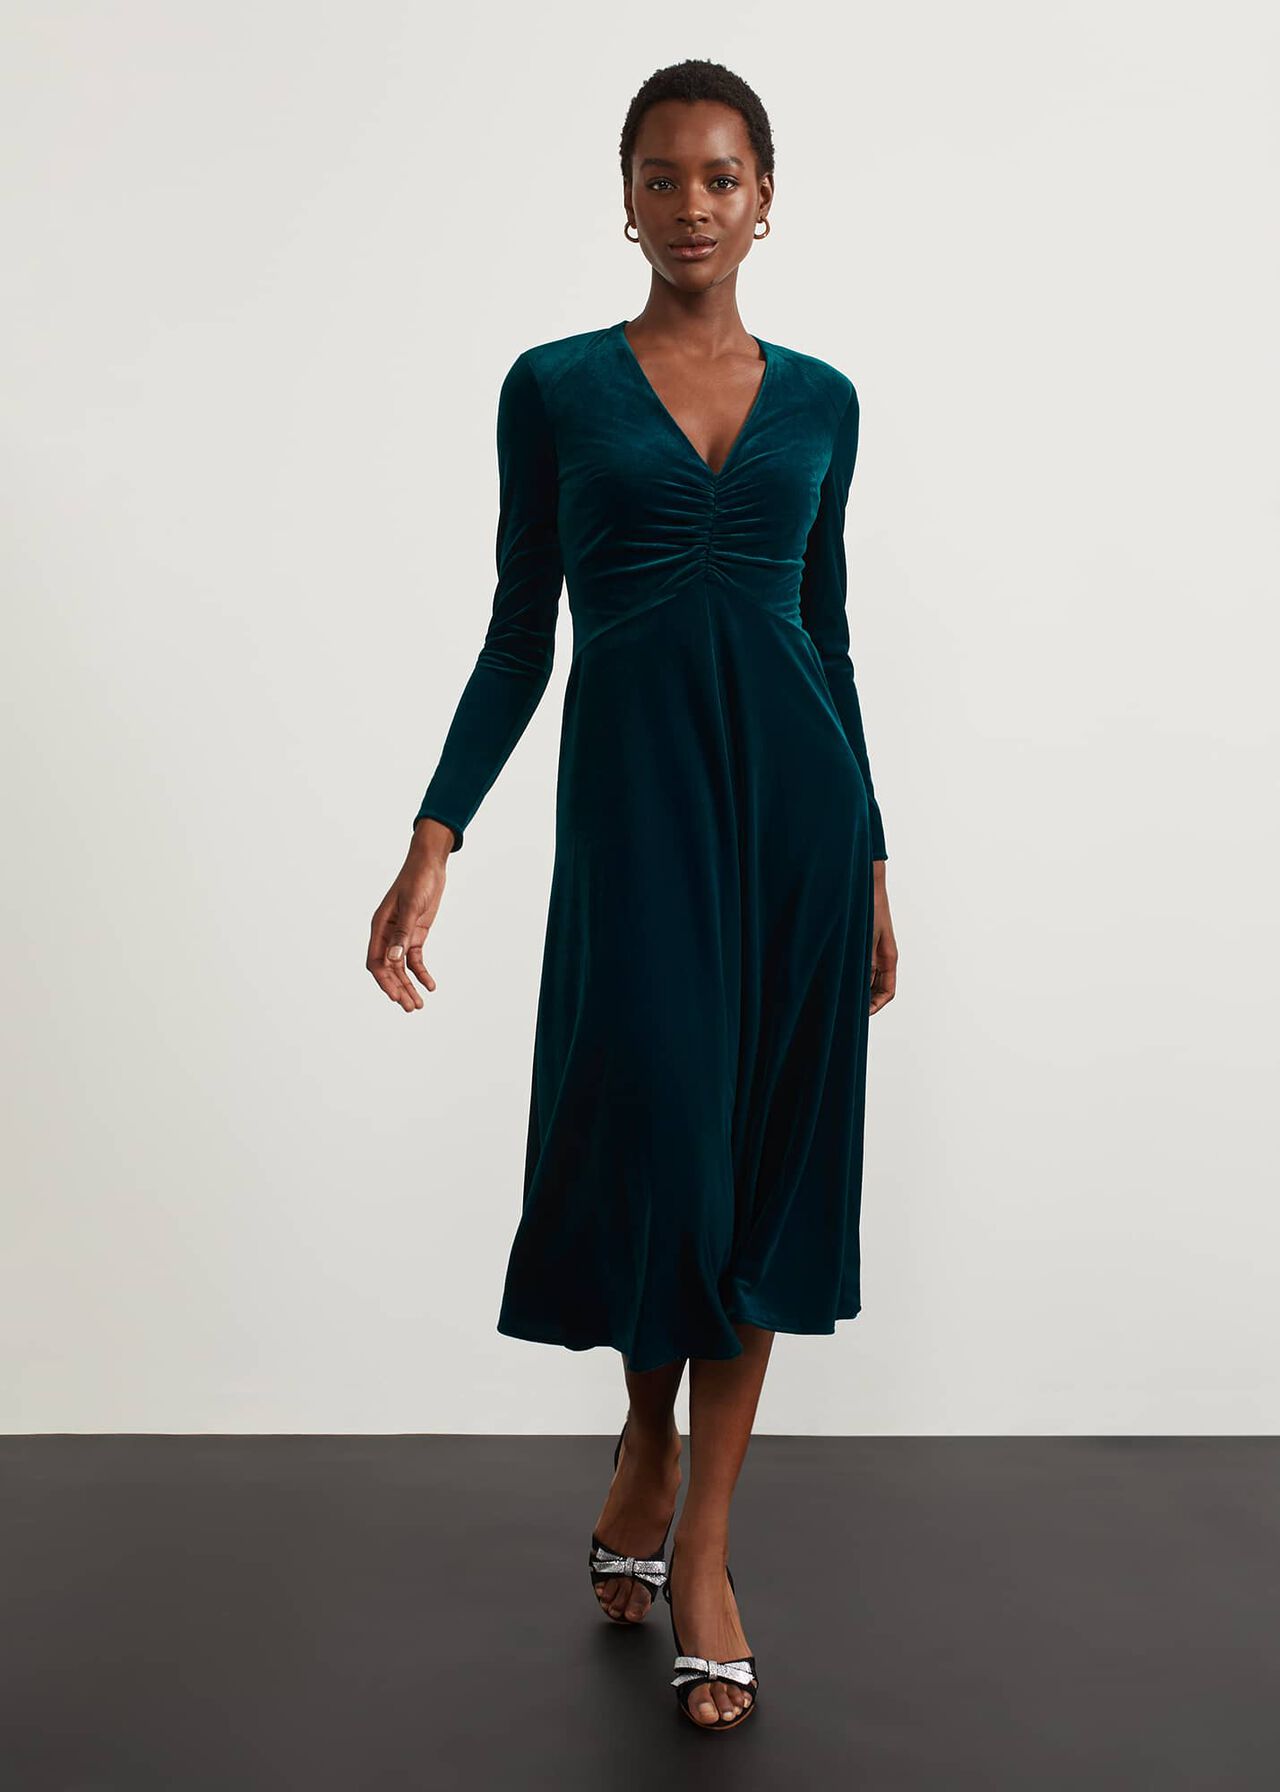 Best New Dresses, The Most Flattering Shapes, Hobbs London